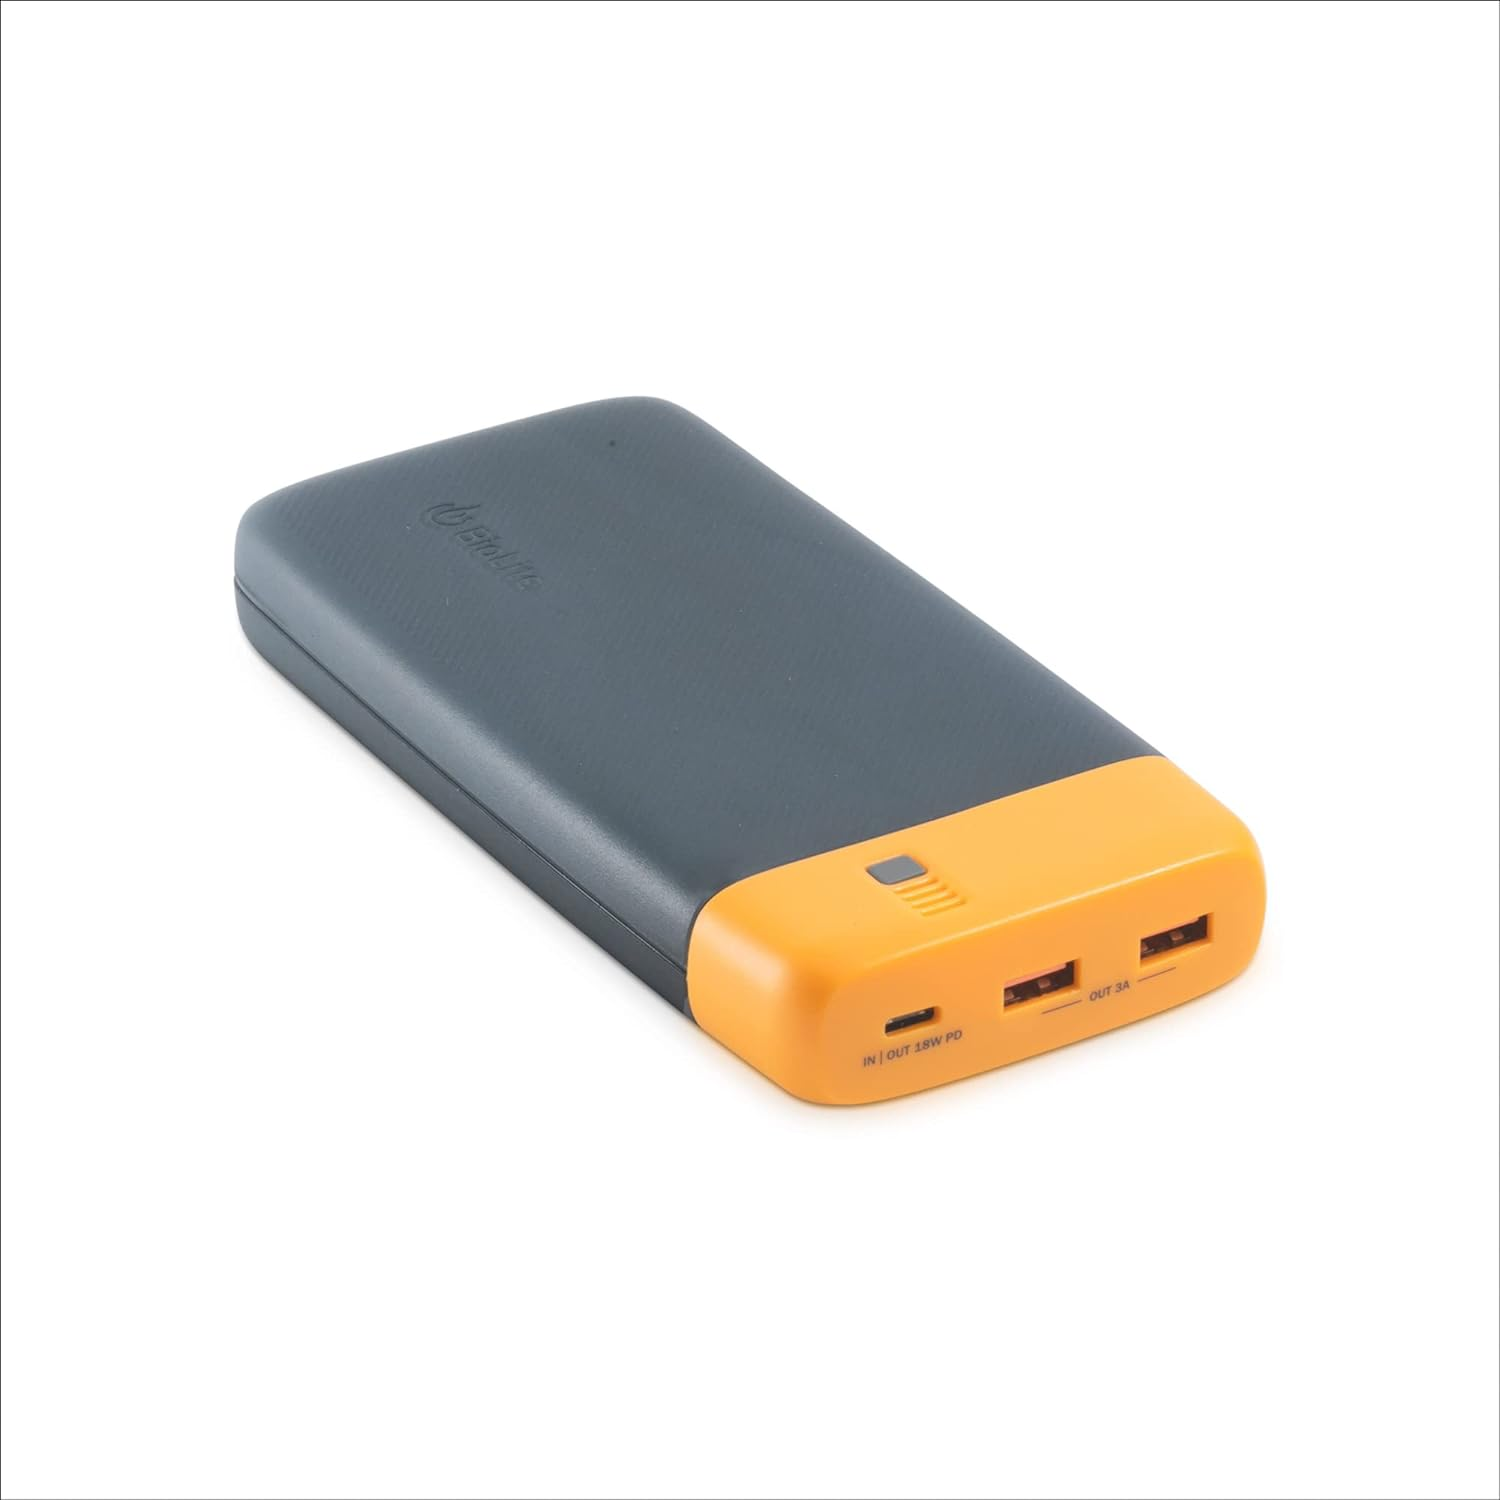 BioLite Charge 80 PD Power Bank on white background.